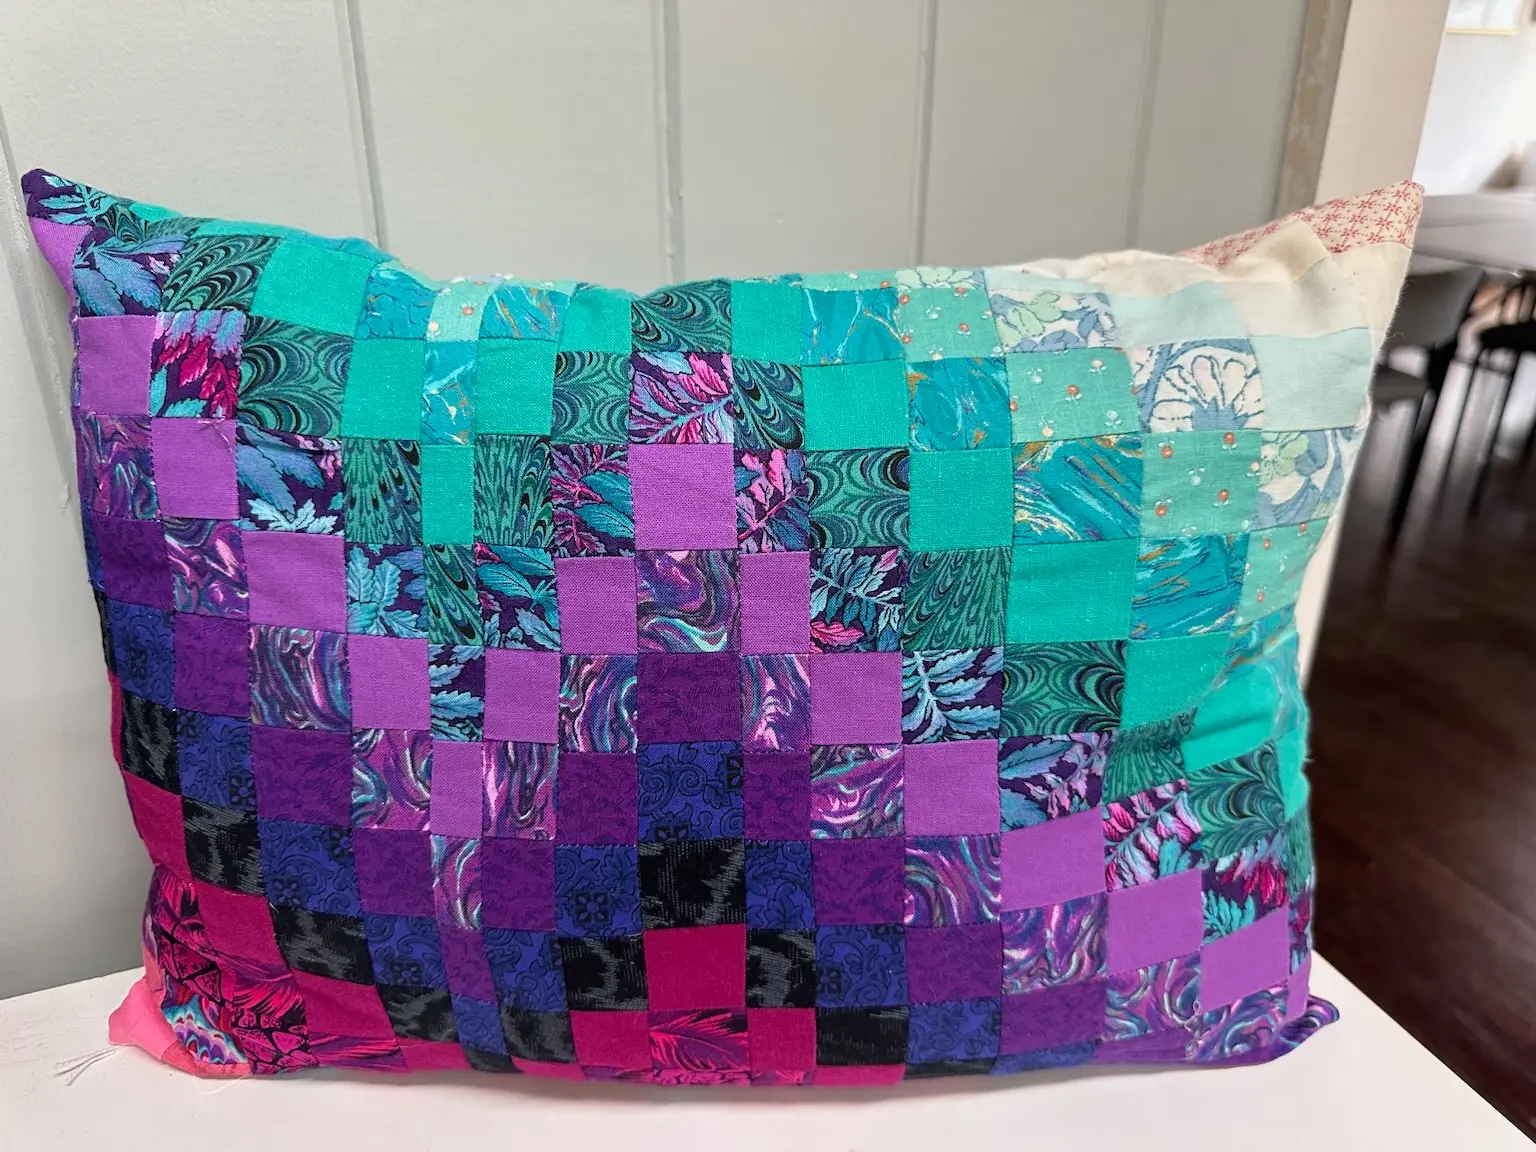 patchwork cushion in pink, purple and turquoise